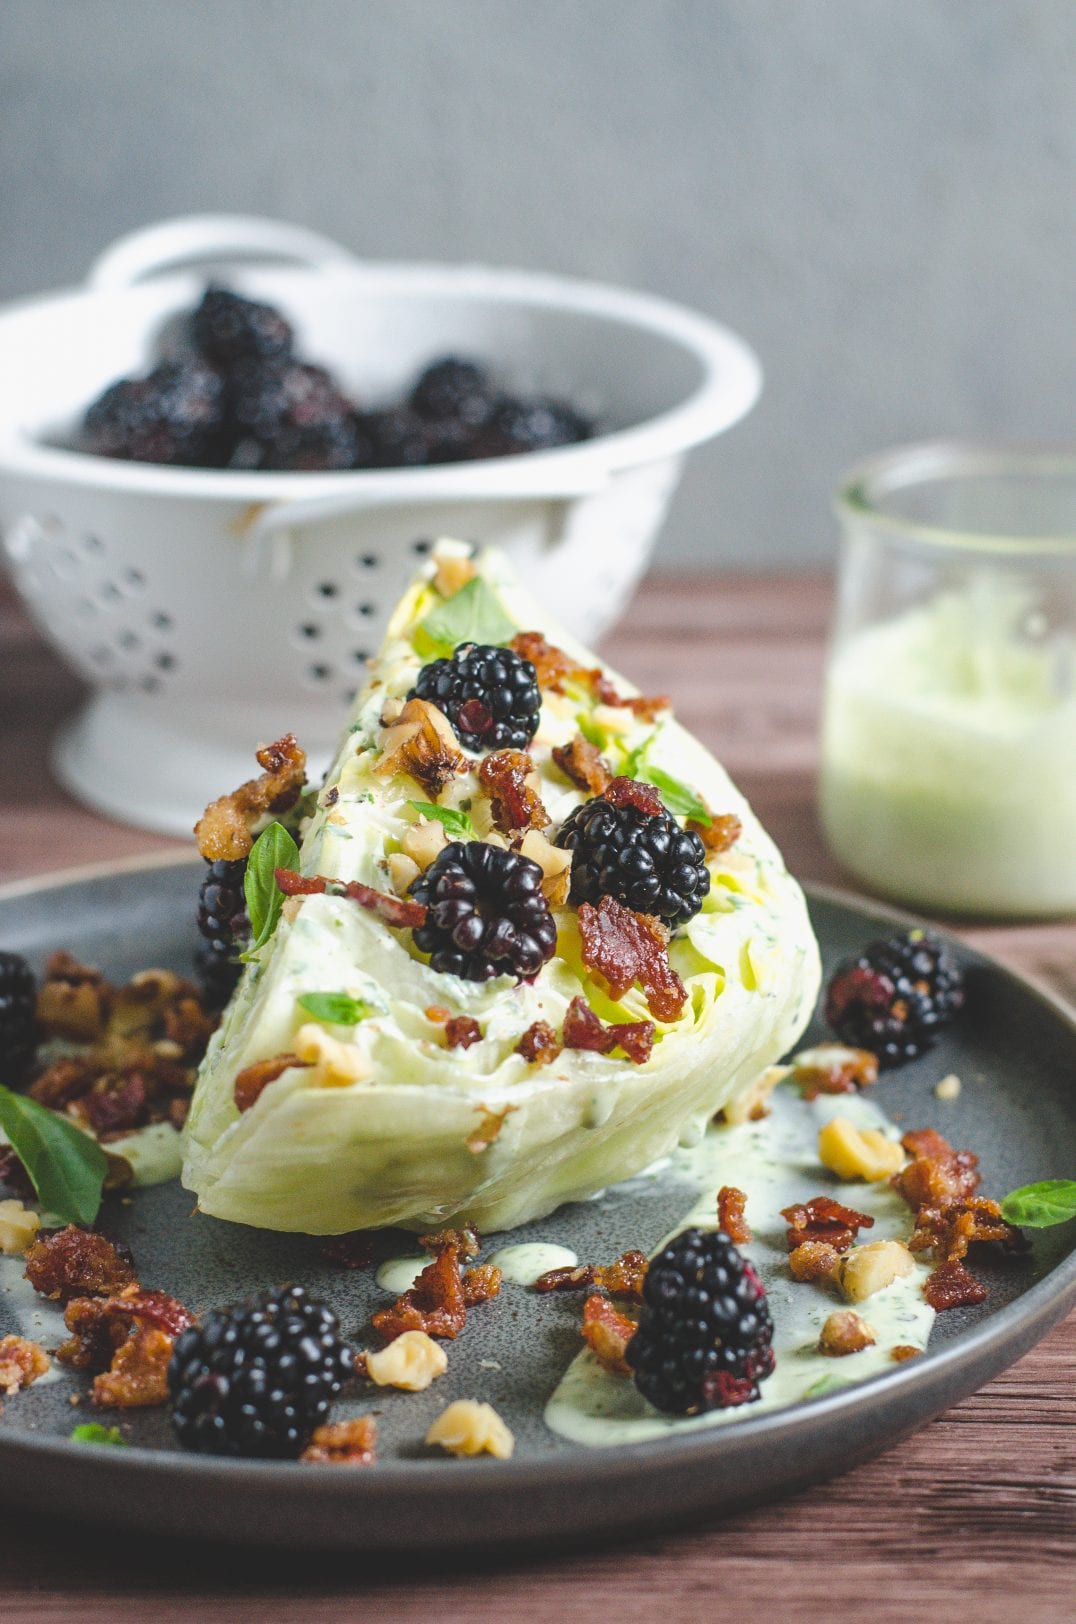 Wedge Salad with Candied Bacon, Walnuts, Blackberries & Basil Ranch